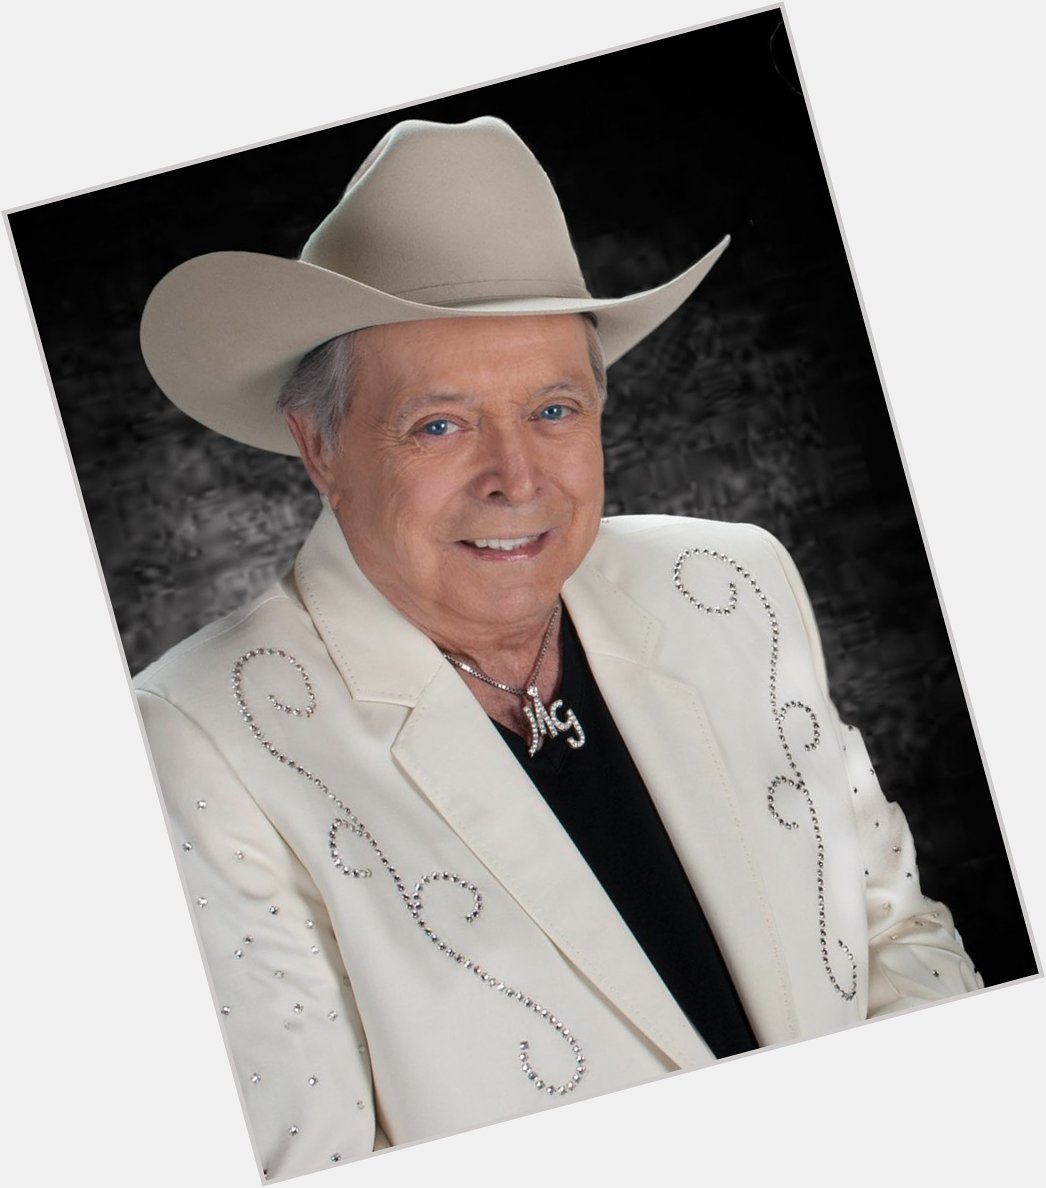 Please join me here at in wishing the one and only Mickey Gilley a very Happy 85th Birthday today  